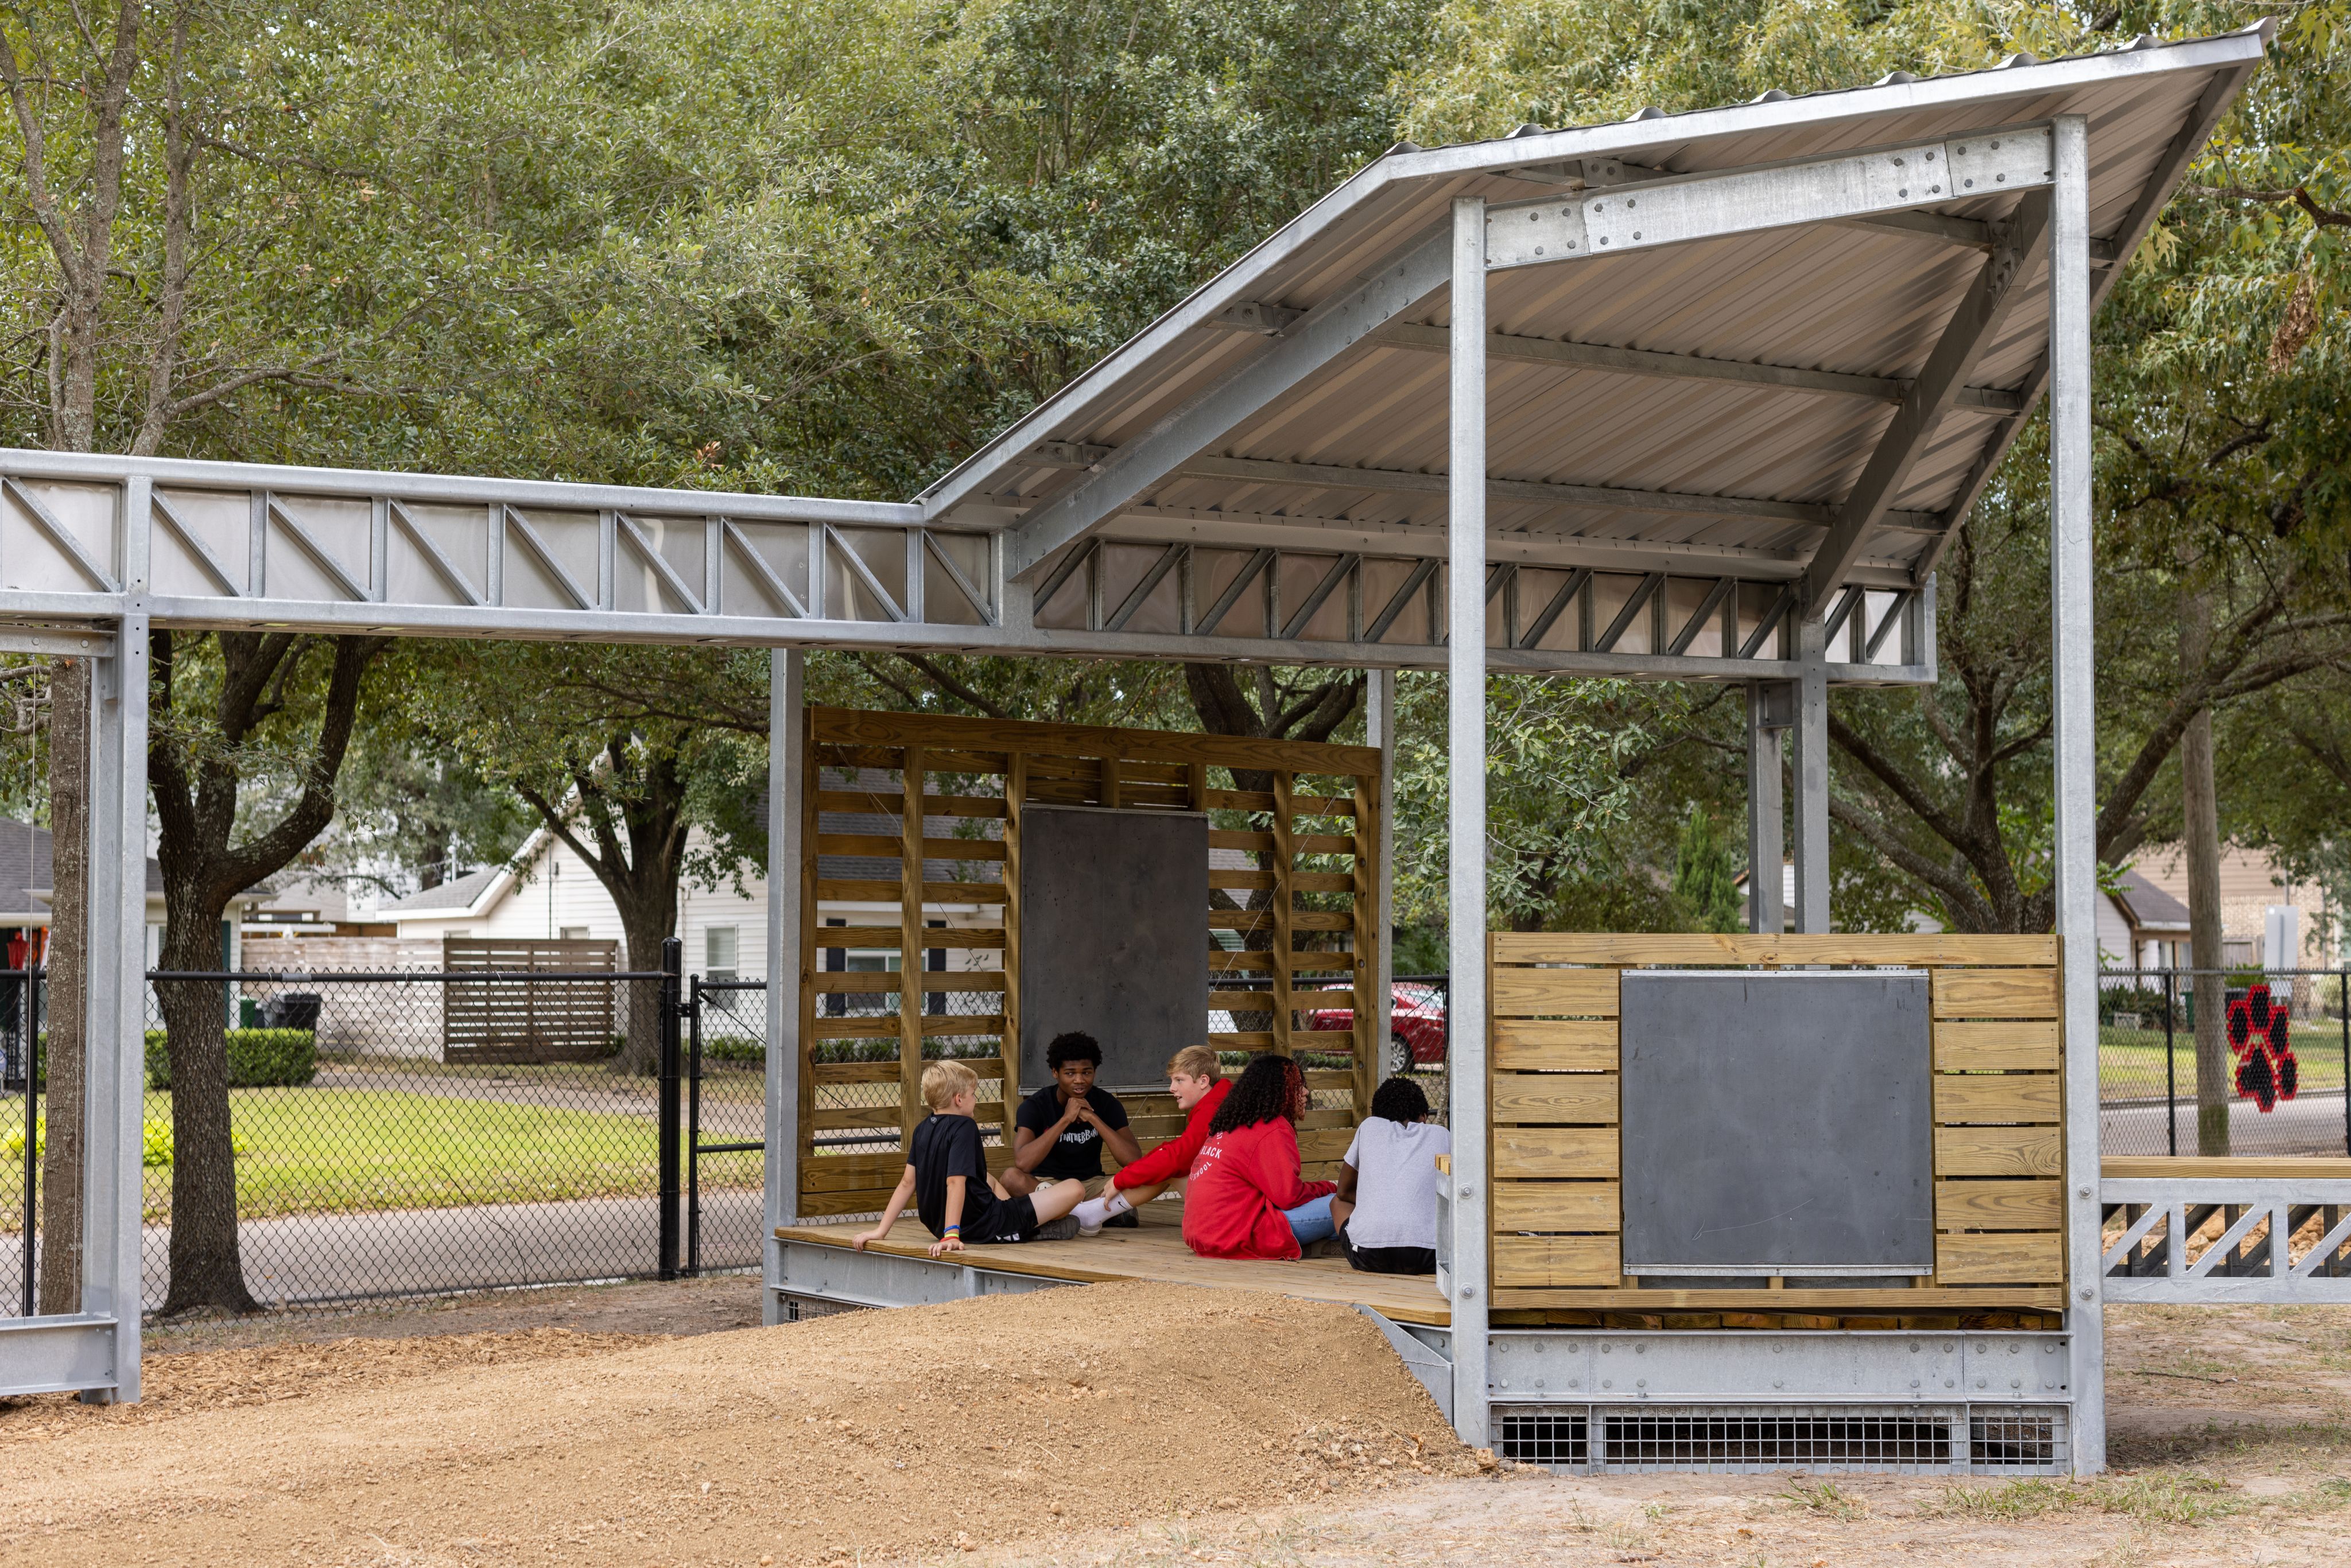 Children sitting in a structure that is used as an outdoor classroom.